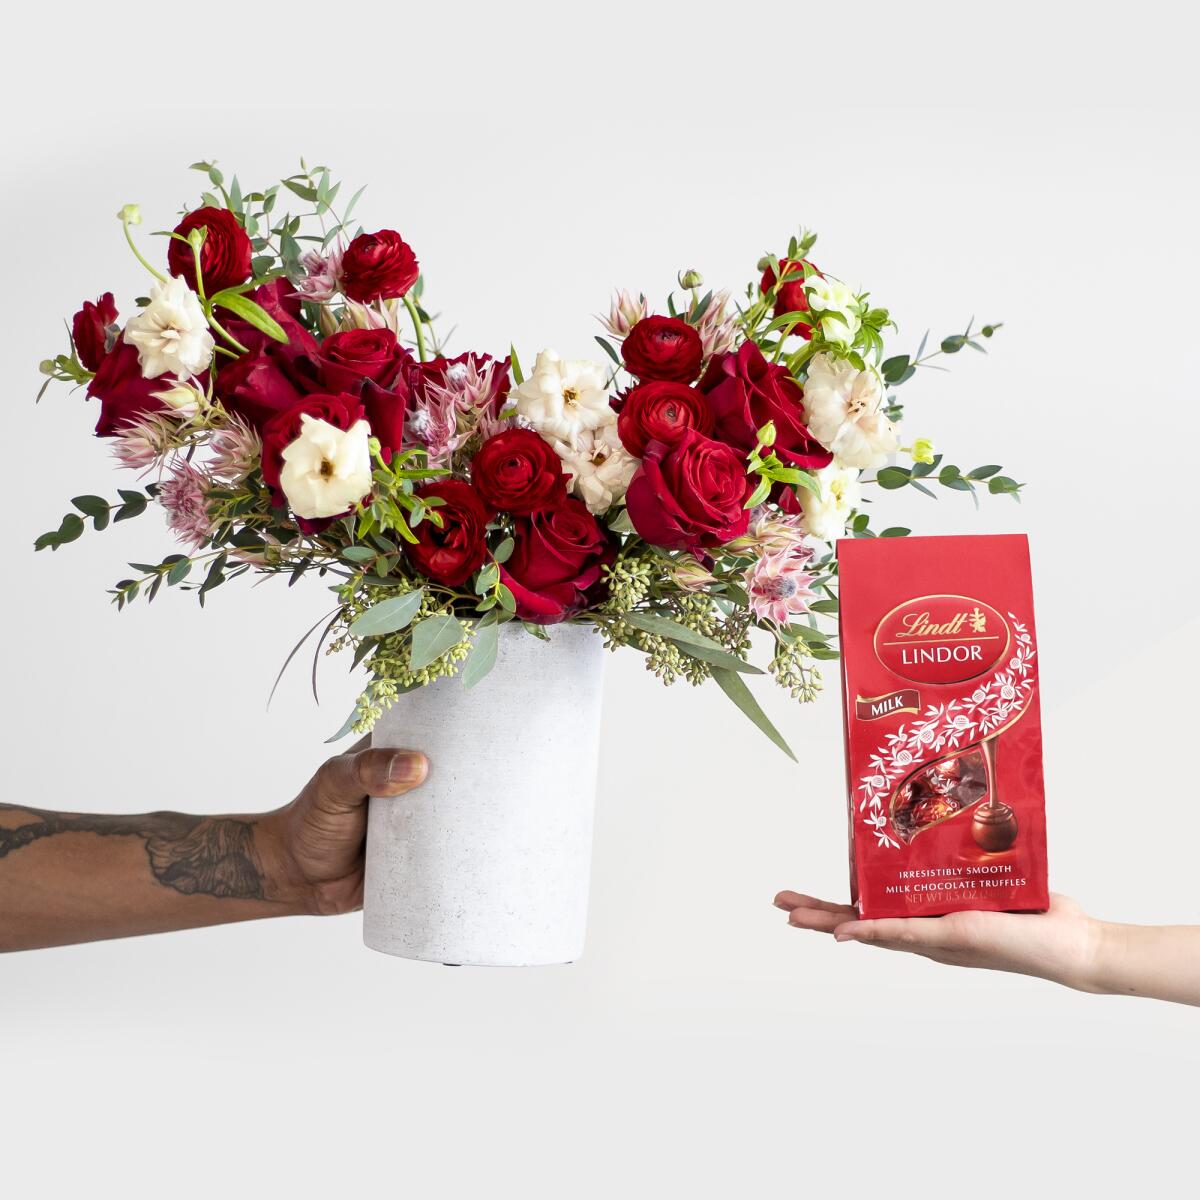 A photo of hands holding Farmgirl Flowers and Lindt Chocolates.